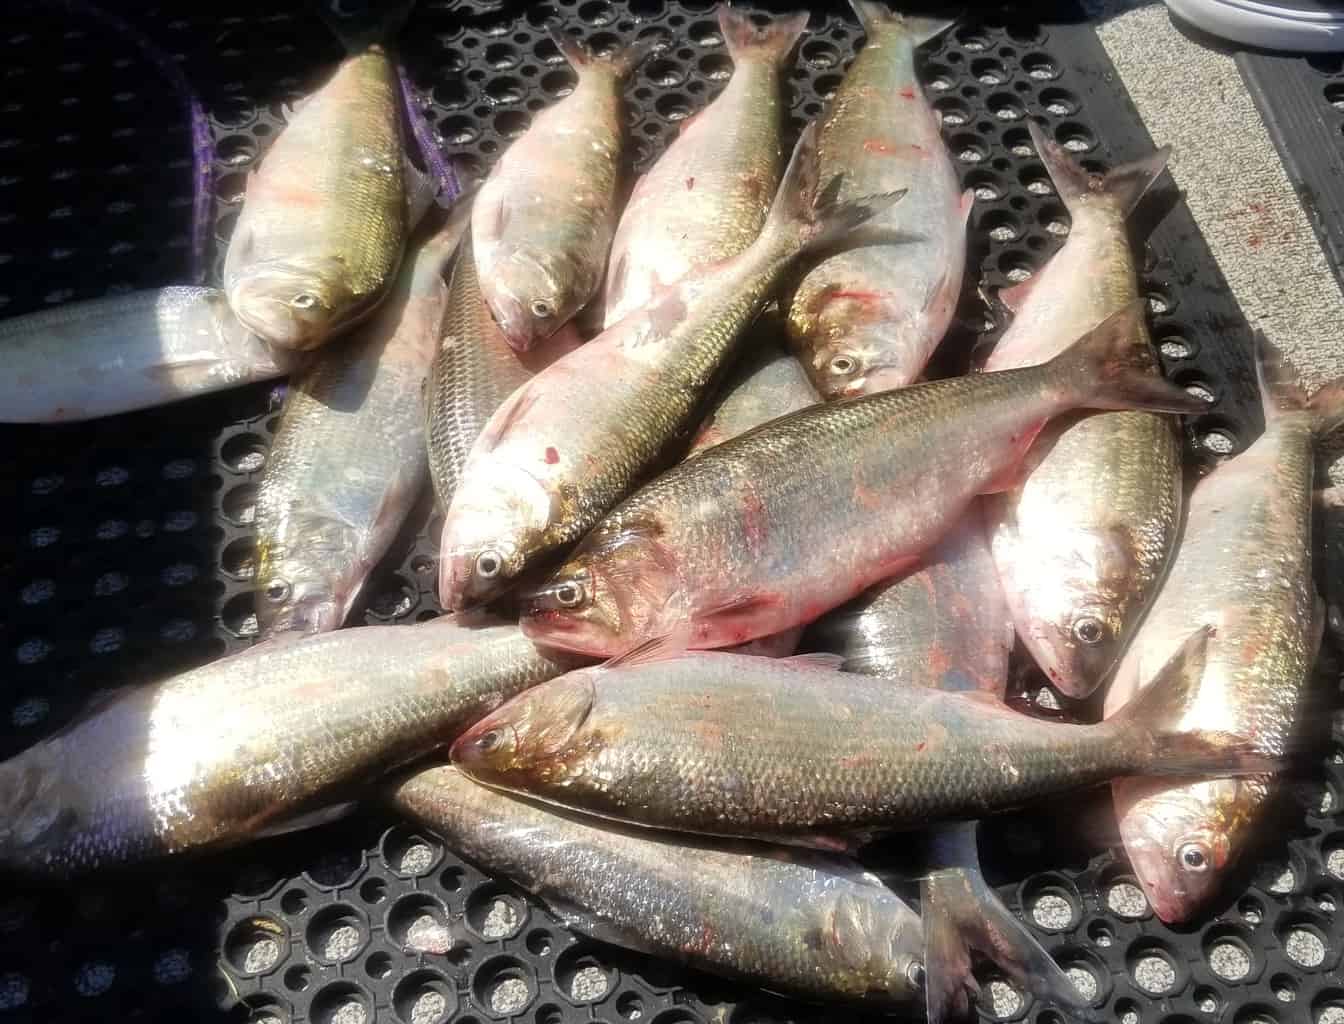 A bunch of shad caught in the Columbia River.